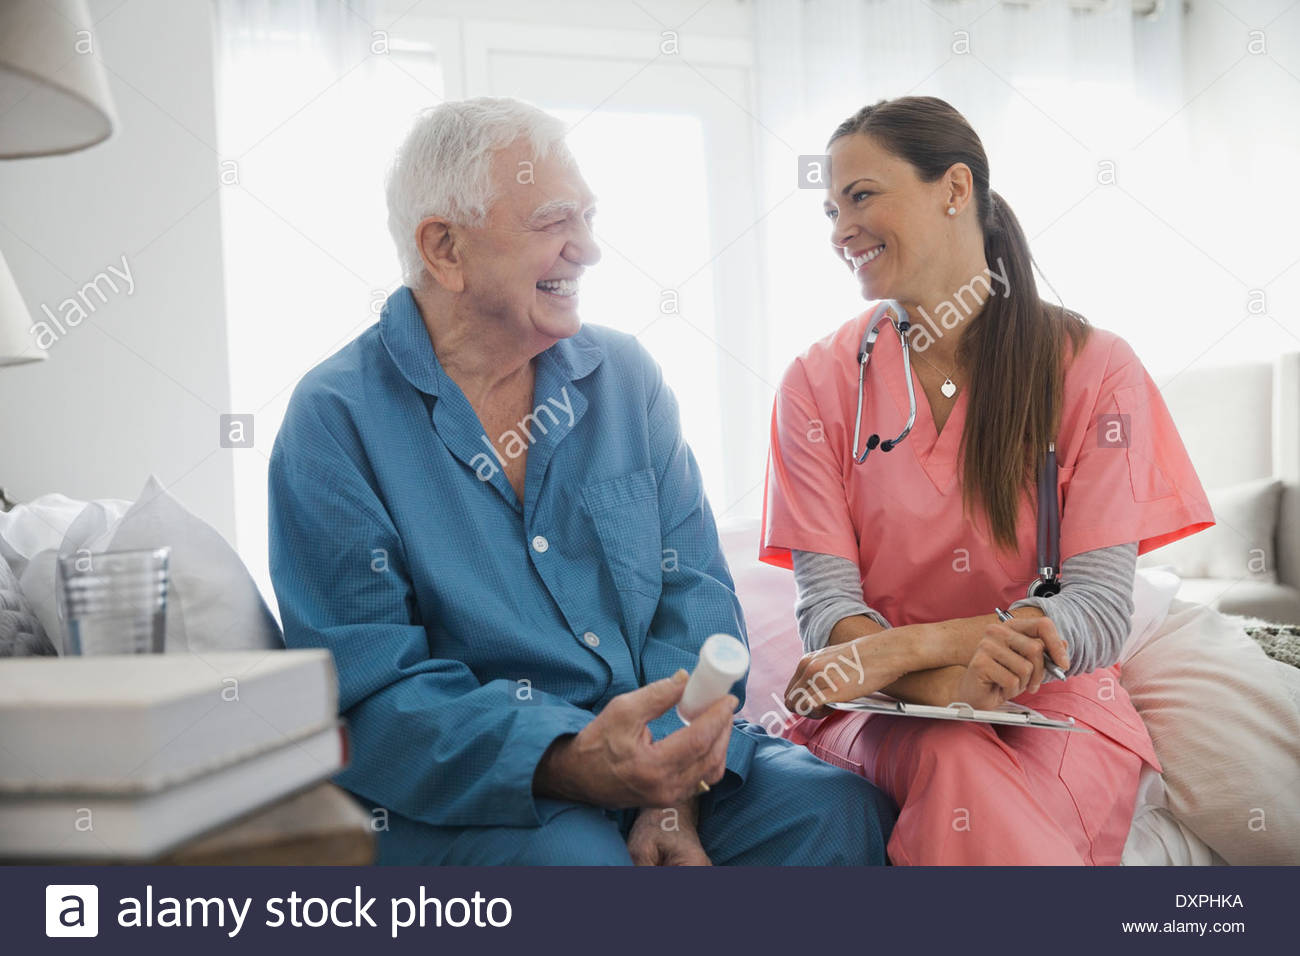 Home care nurse sitting with senior patient Stock Photo